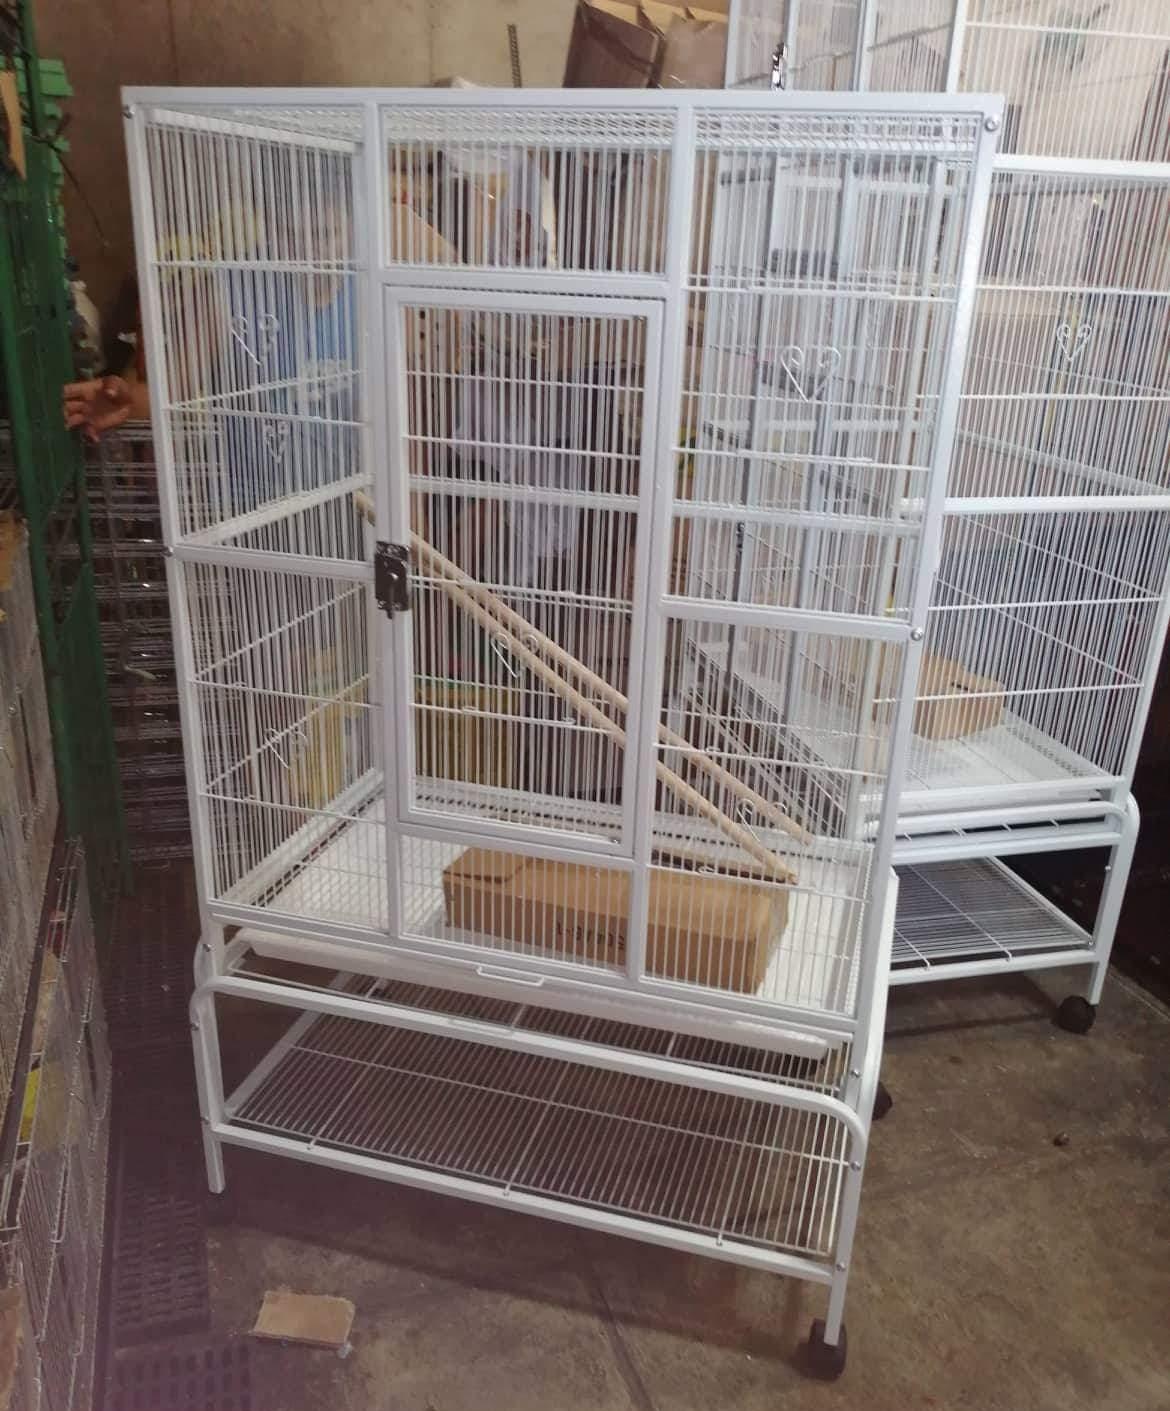 love birds cage for sale